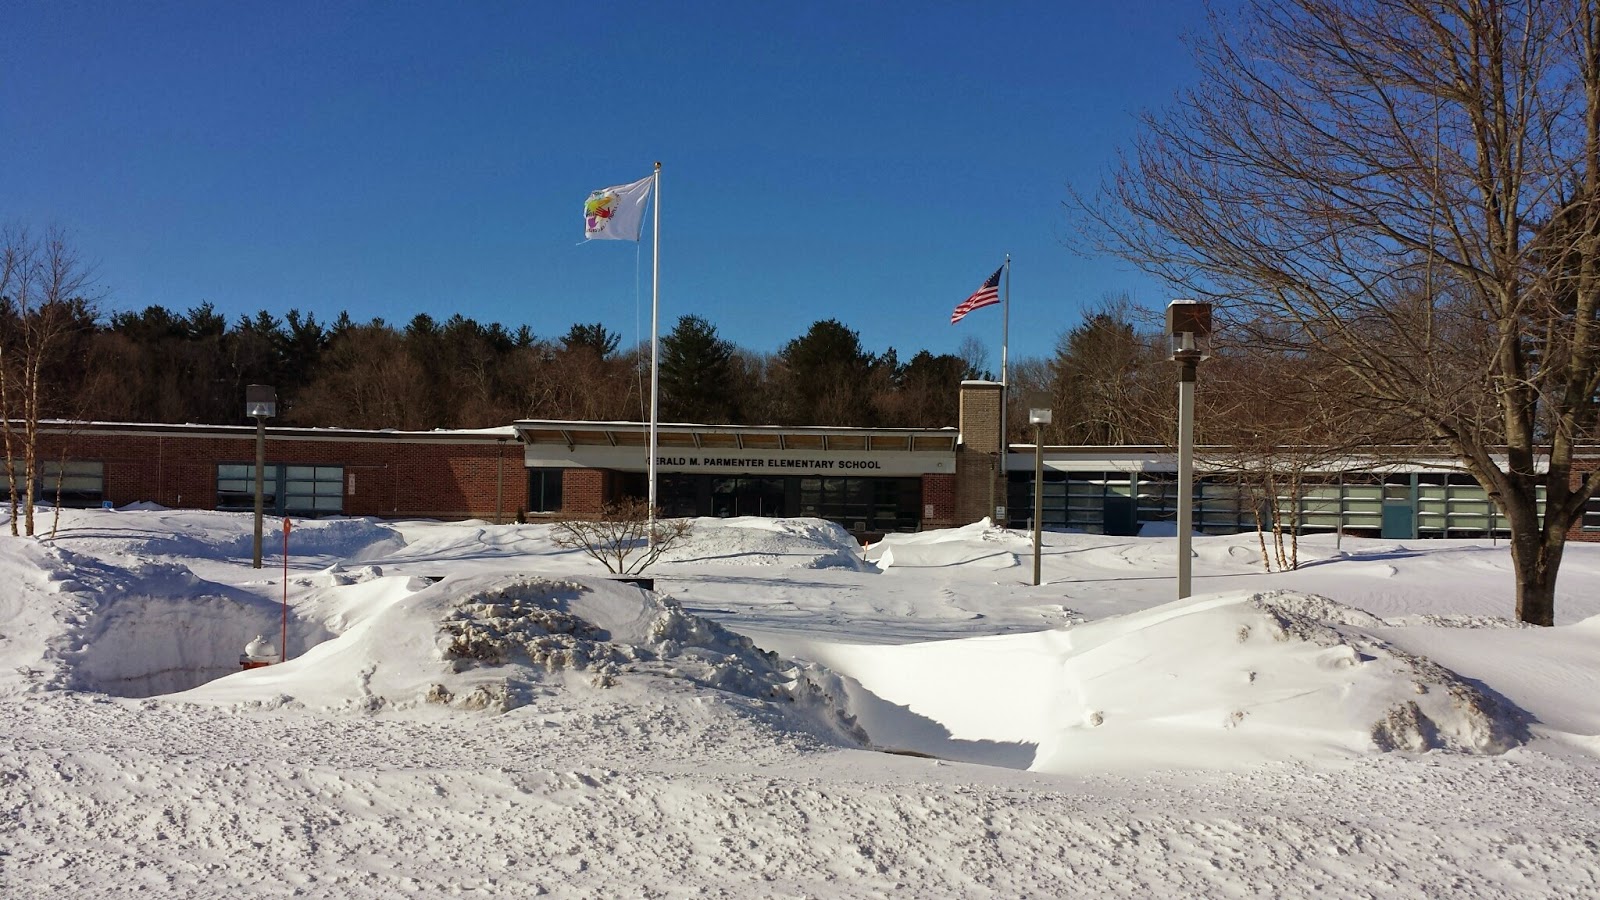 Parmenter School - during the vacation, sidewalks cleared today